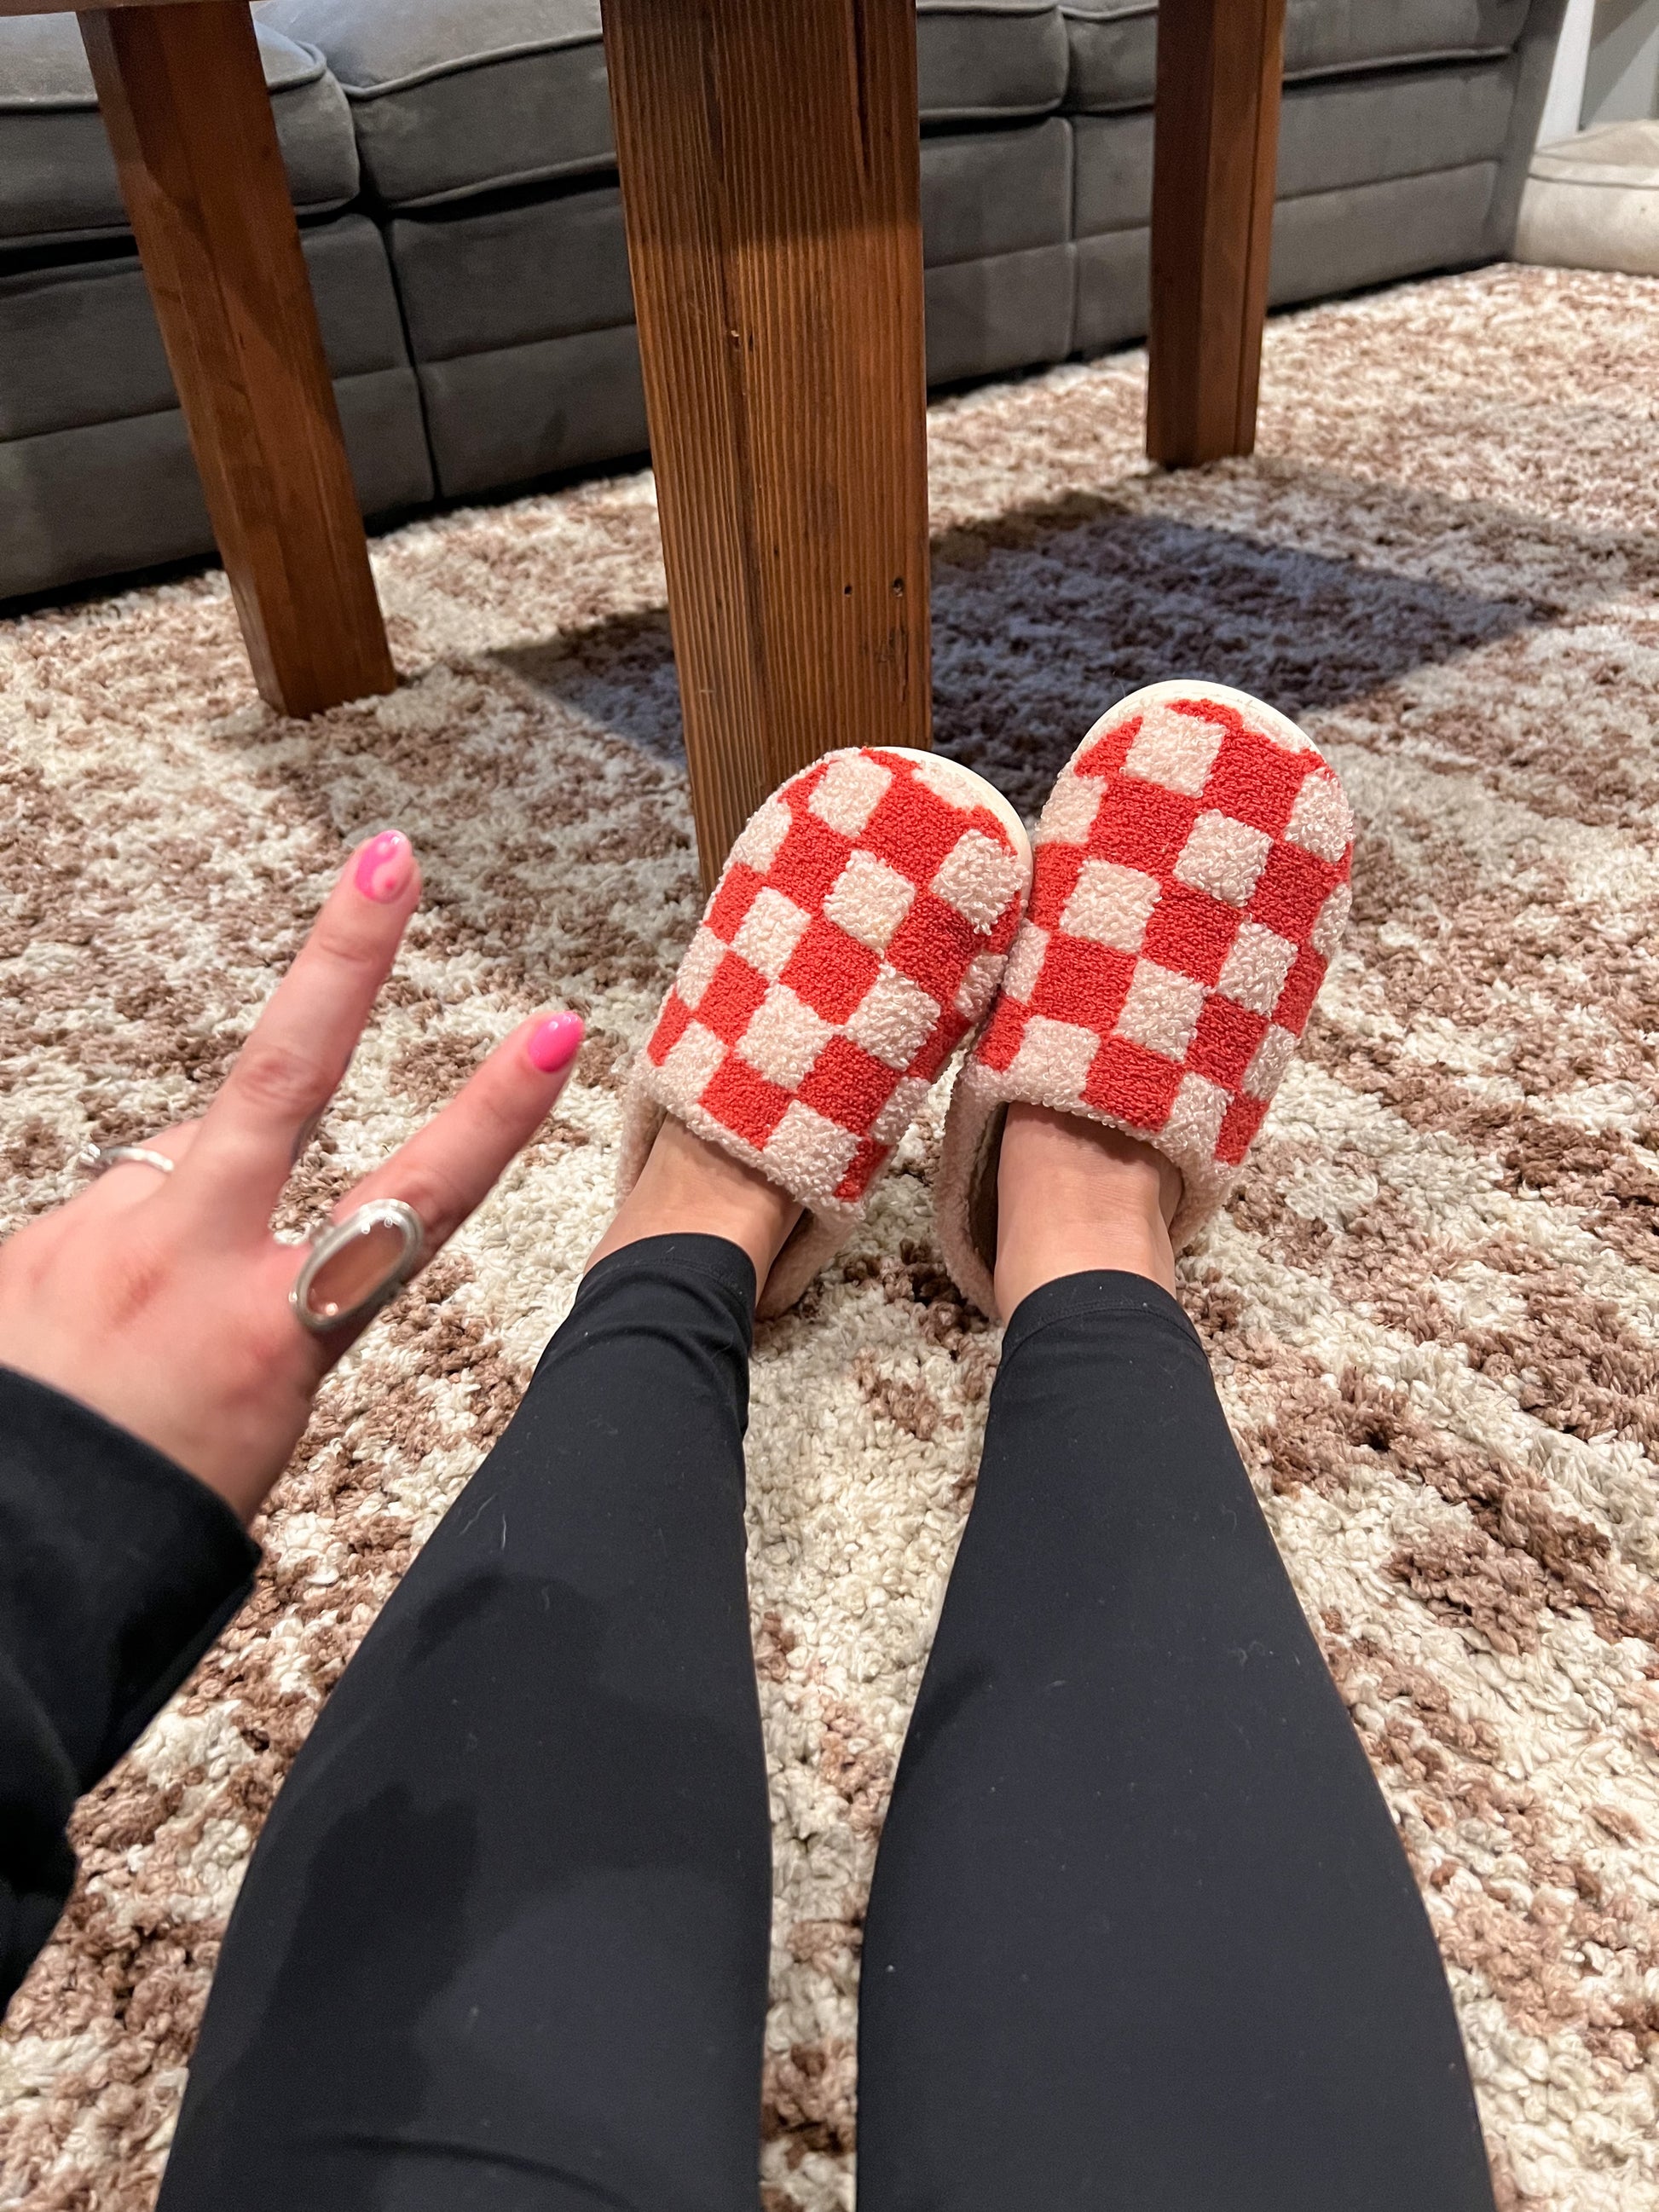 Slippers Pink Checkered